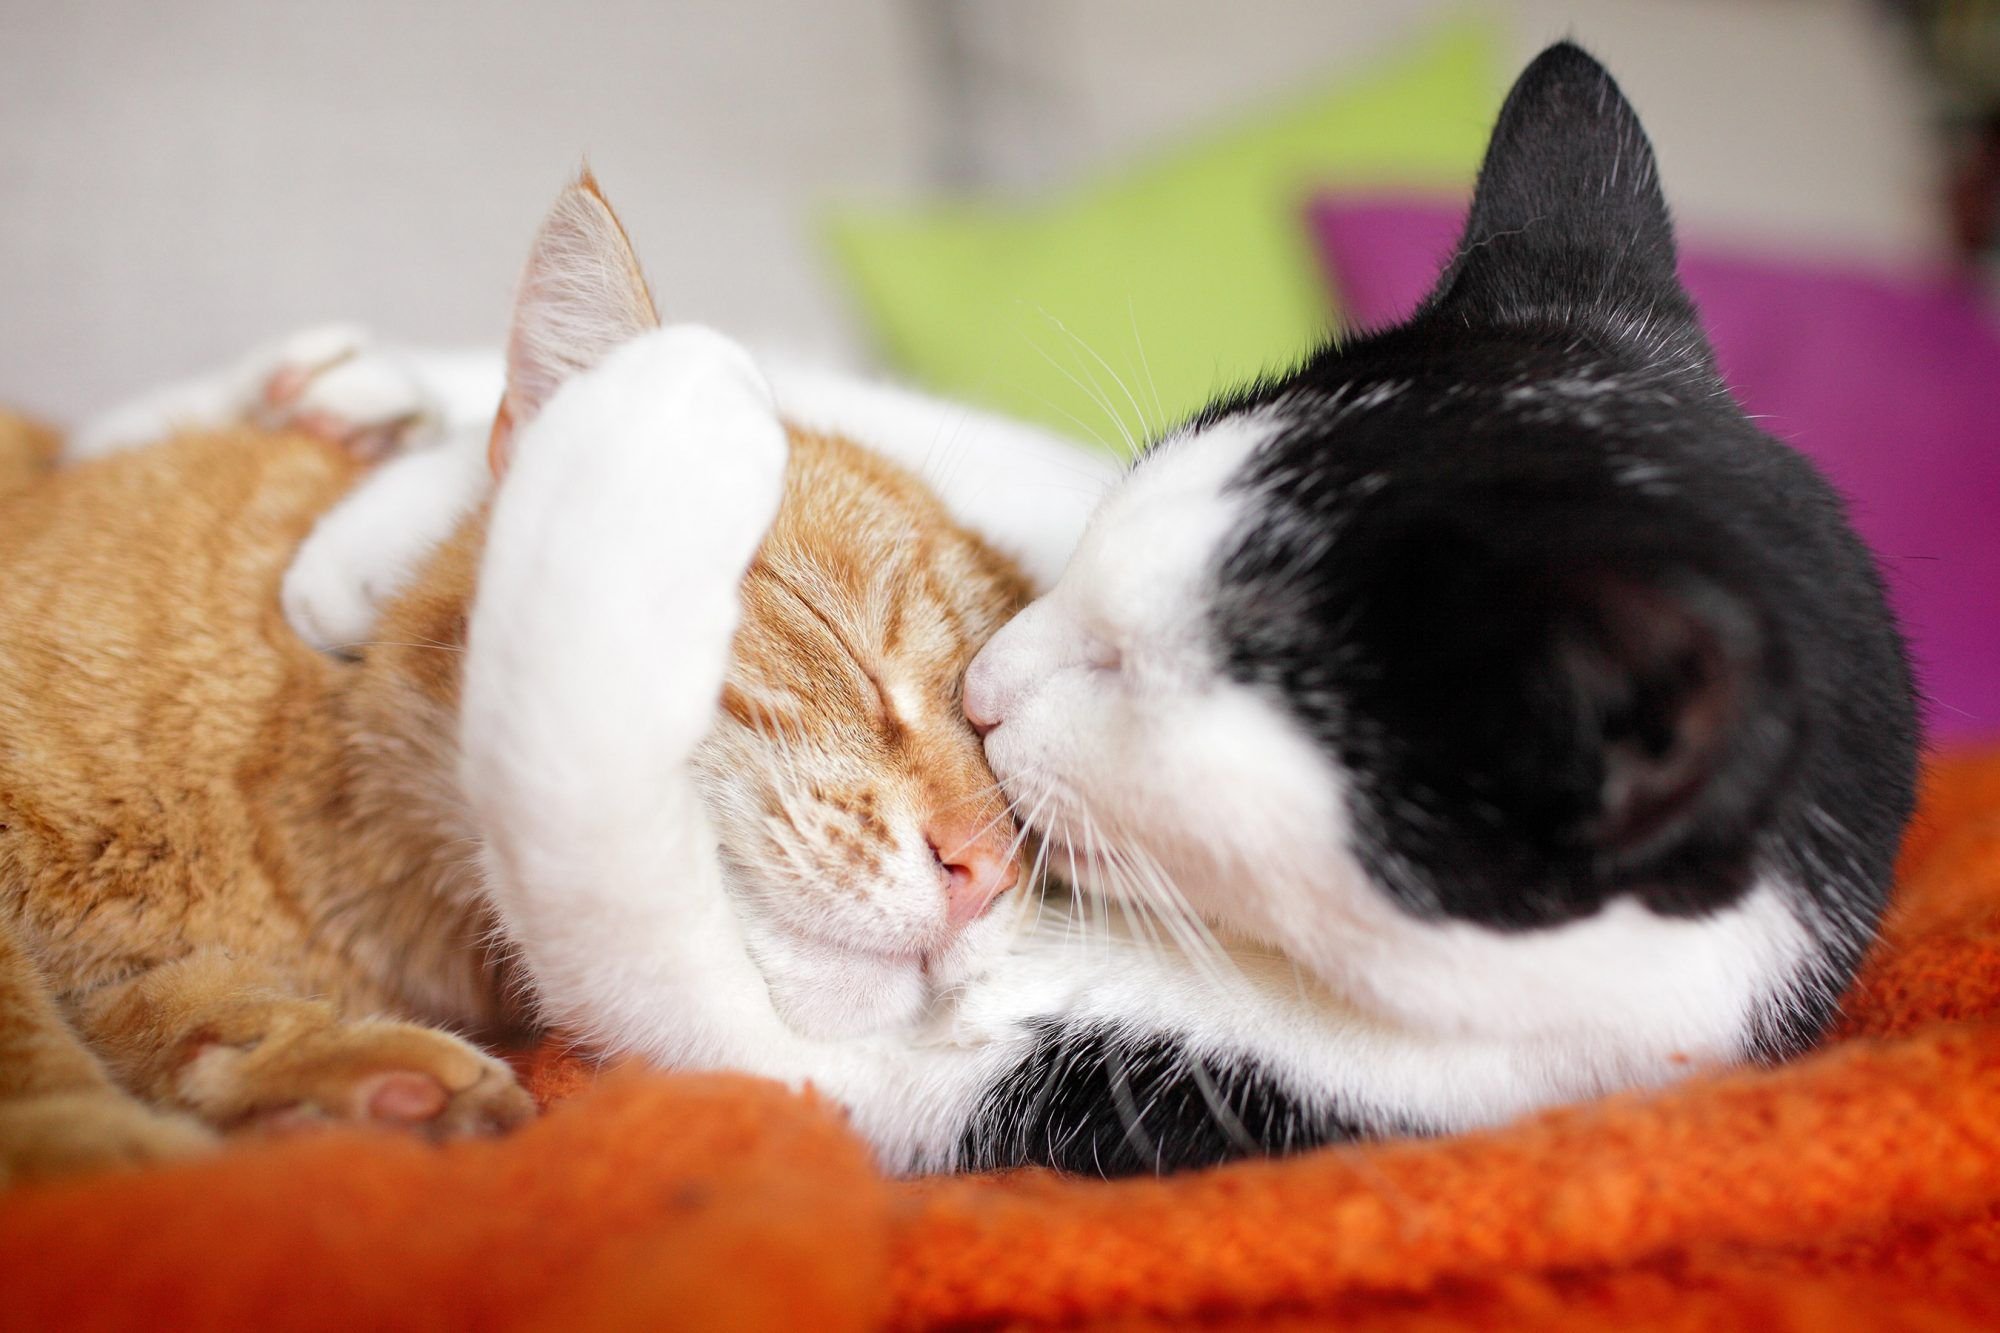 Does Your Cat Love You? 10 Unique Ways Felines Say Those Three Little Words